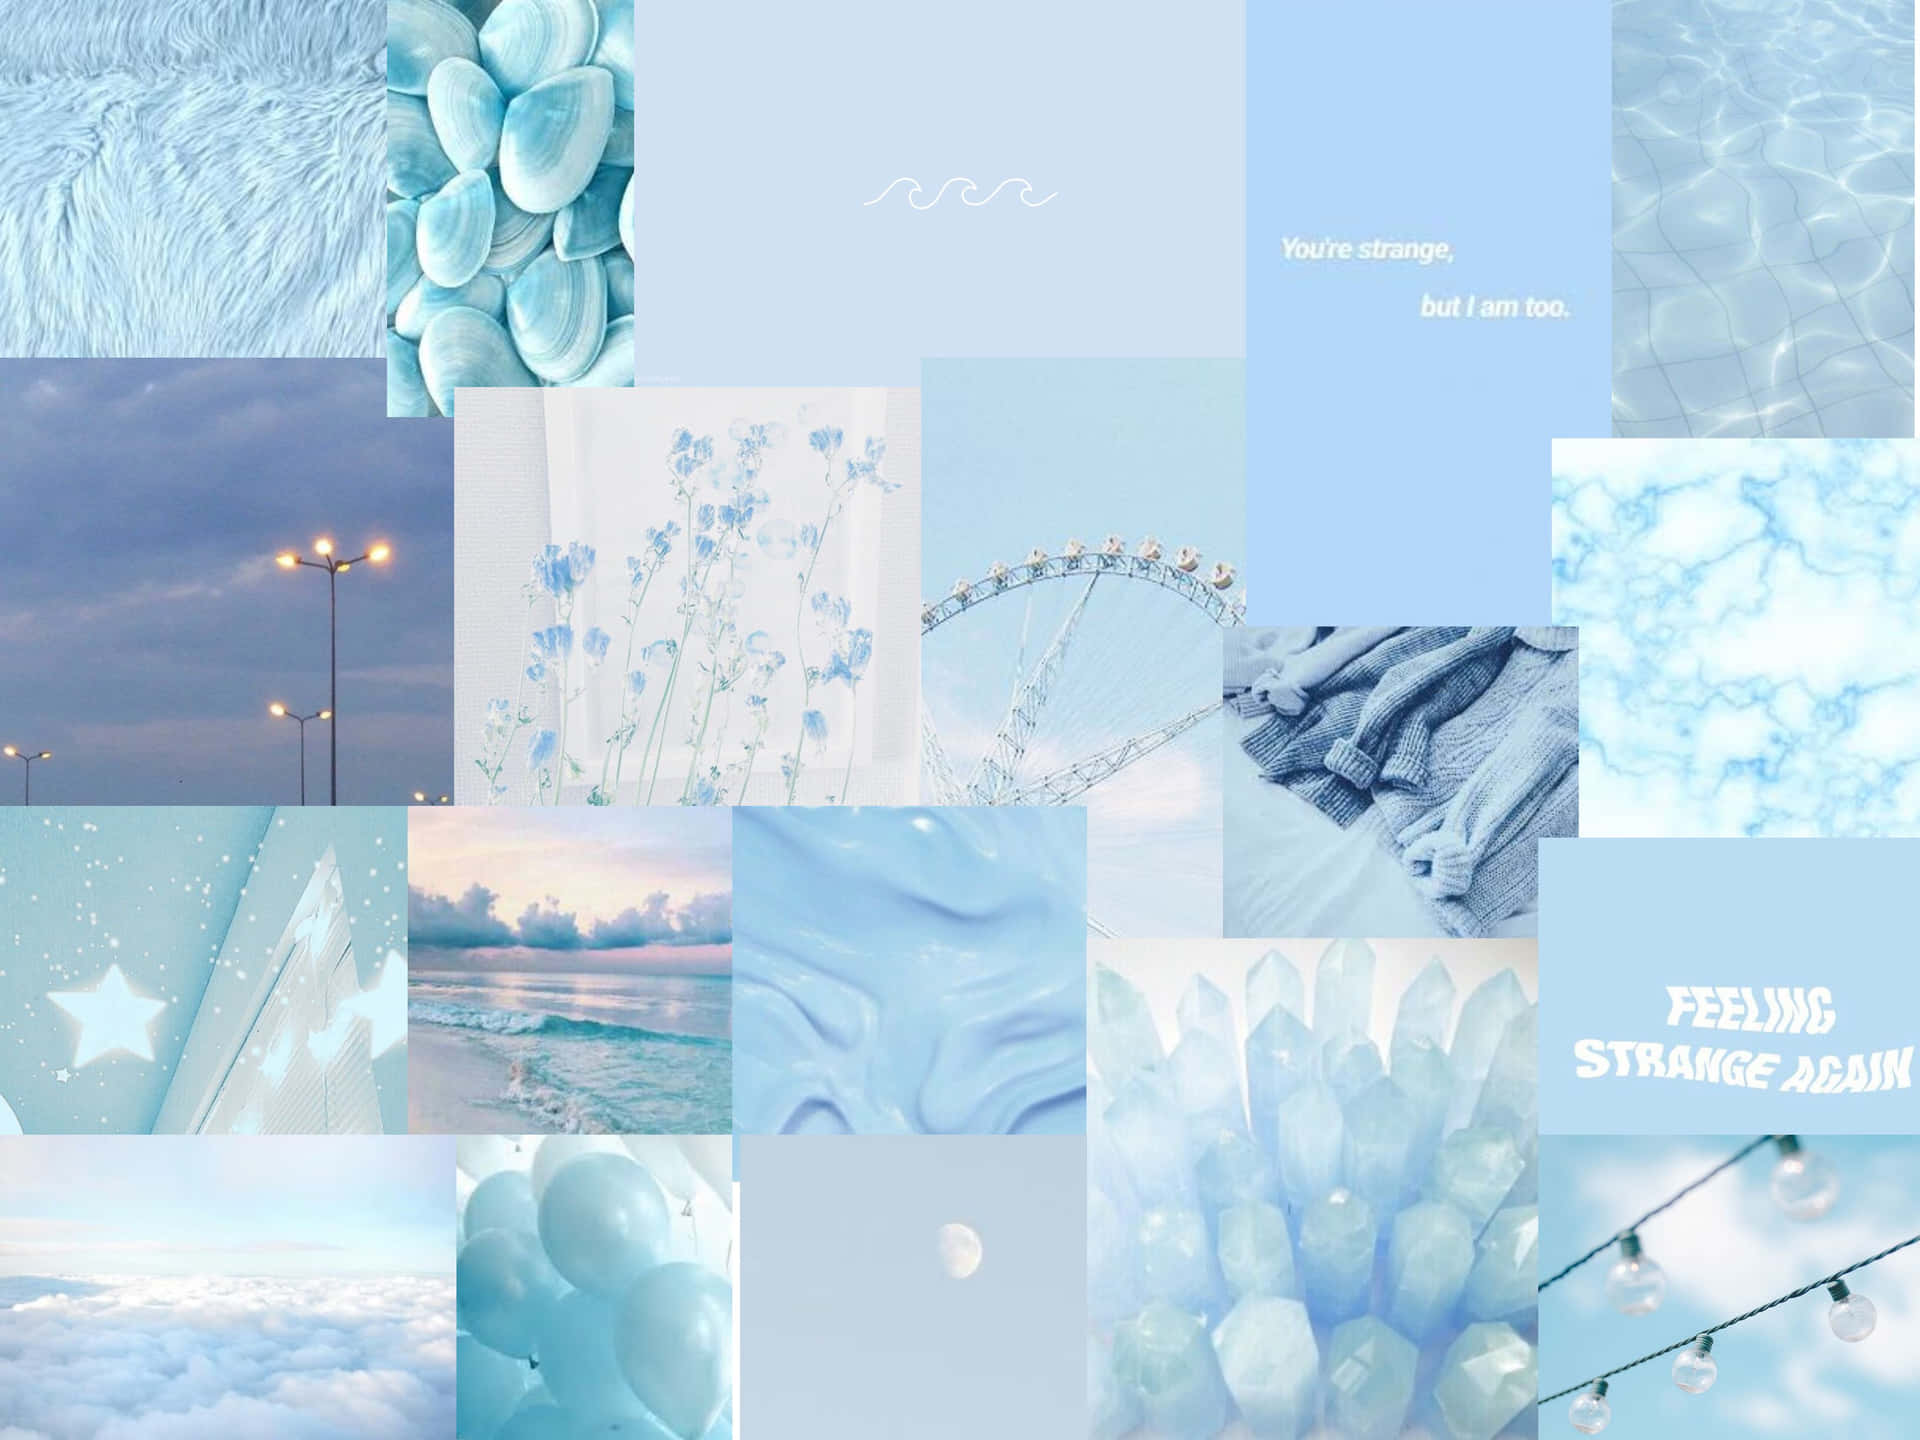 Top 85+ blue aesthetic collage wallpaper best - in.cdgdbentre